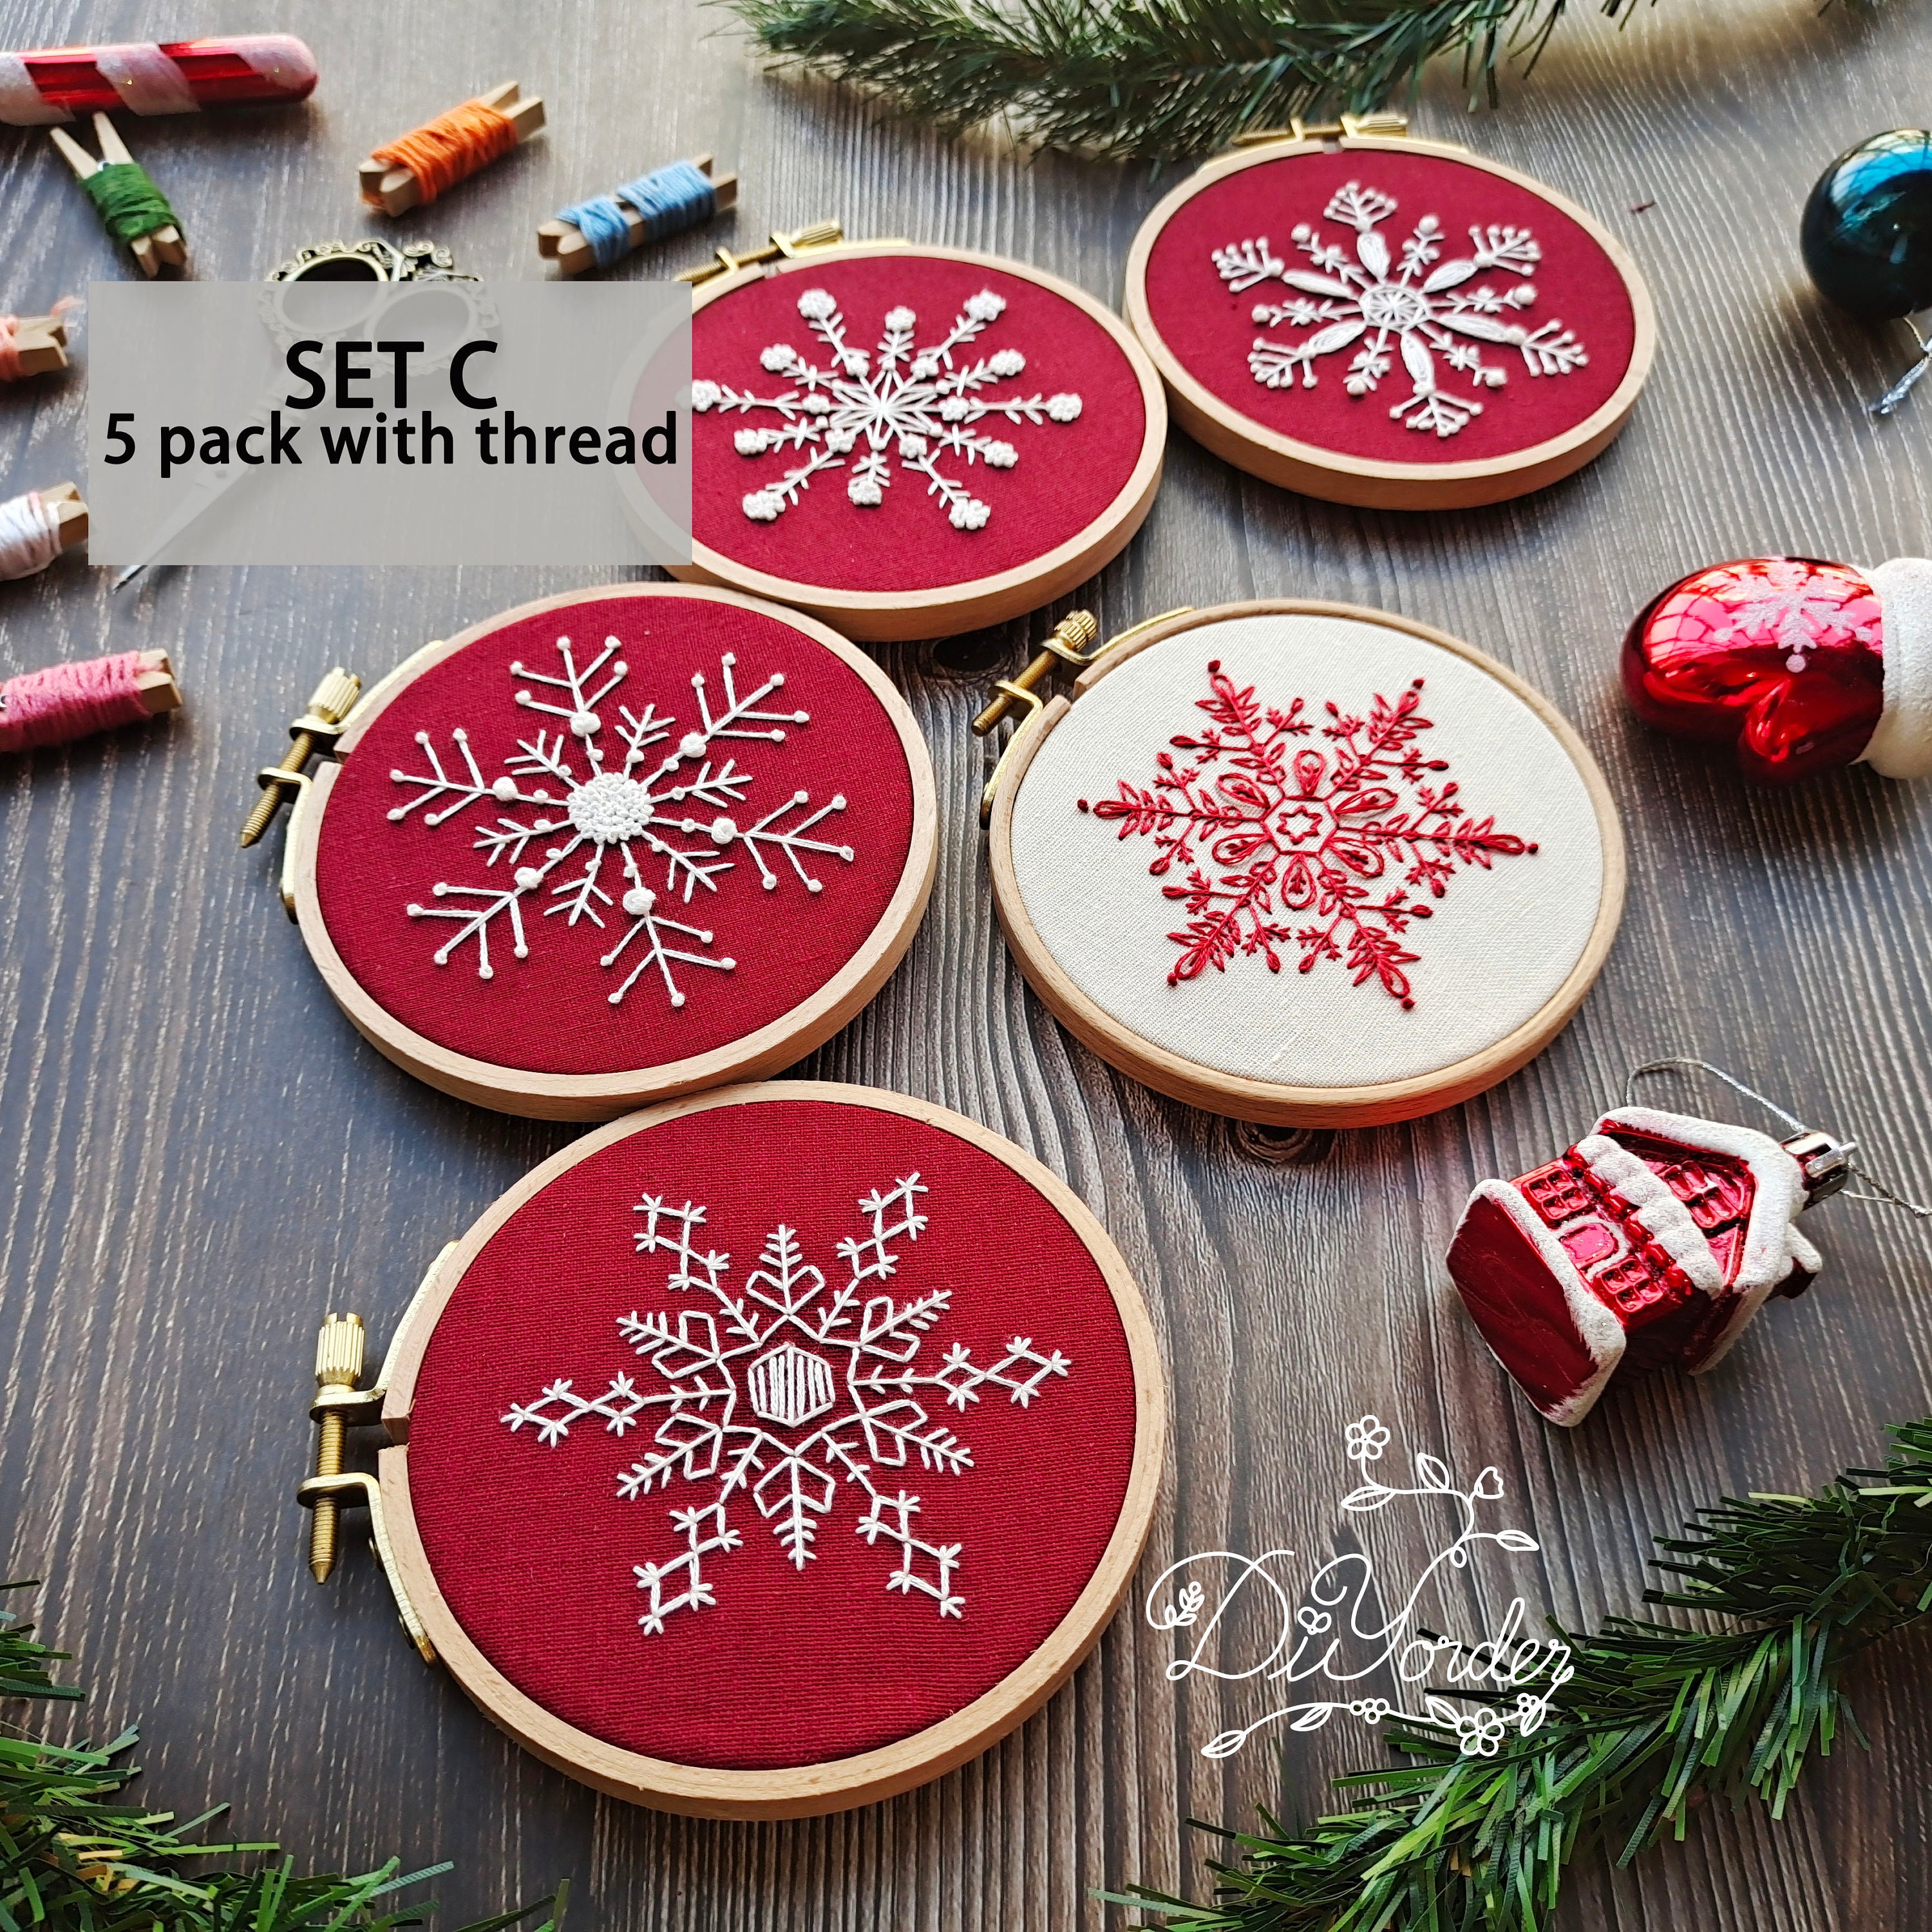 Christmas Ornament Kit, Embroidery Ornament DIY, Festive ornament,  Christmas lights, Ornament Craft Kit, Make At Home, Holiday Ornament Kit —  I Heart Stitch Art: Beginner Embroidery Kits + Patterns